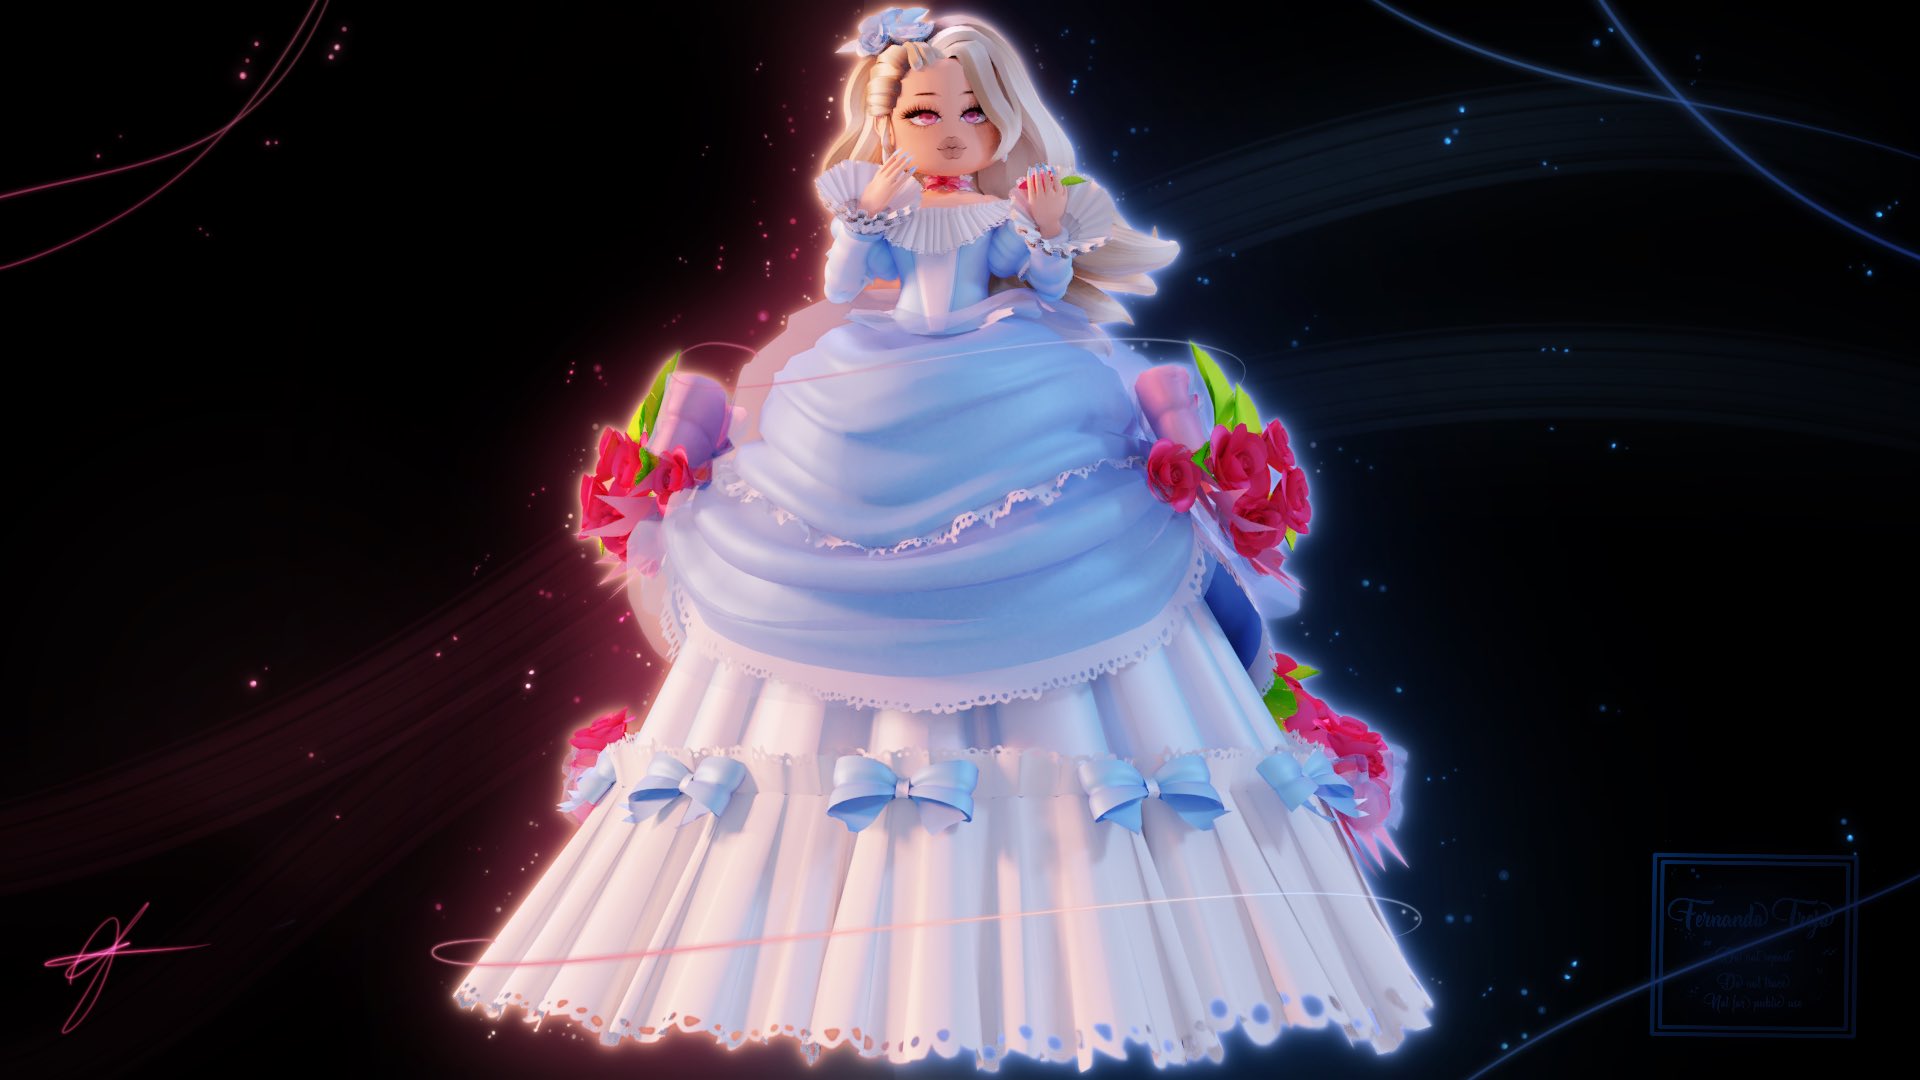 Royale High Concept Sets + Makeups (Several Included)